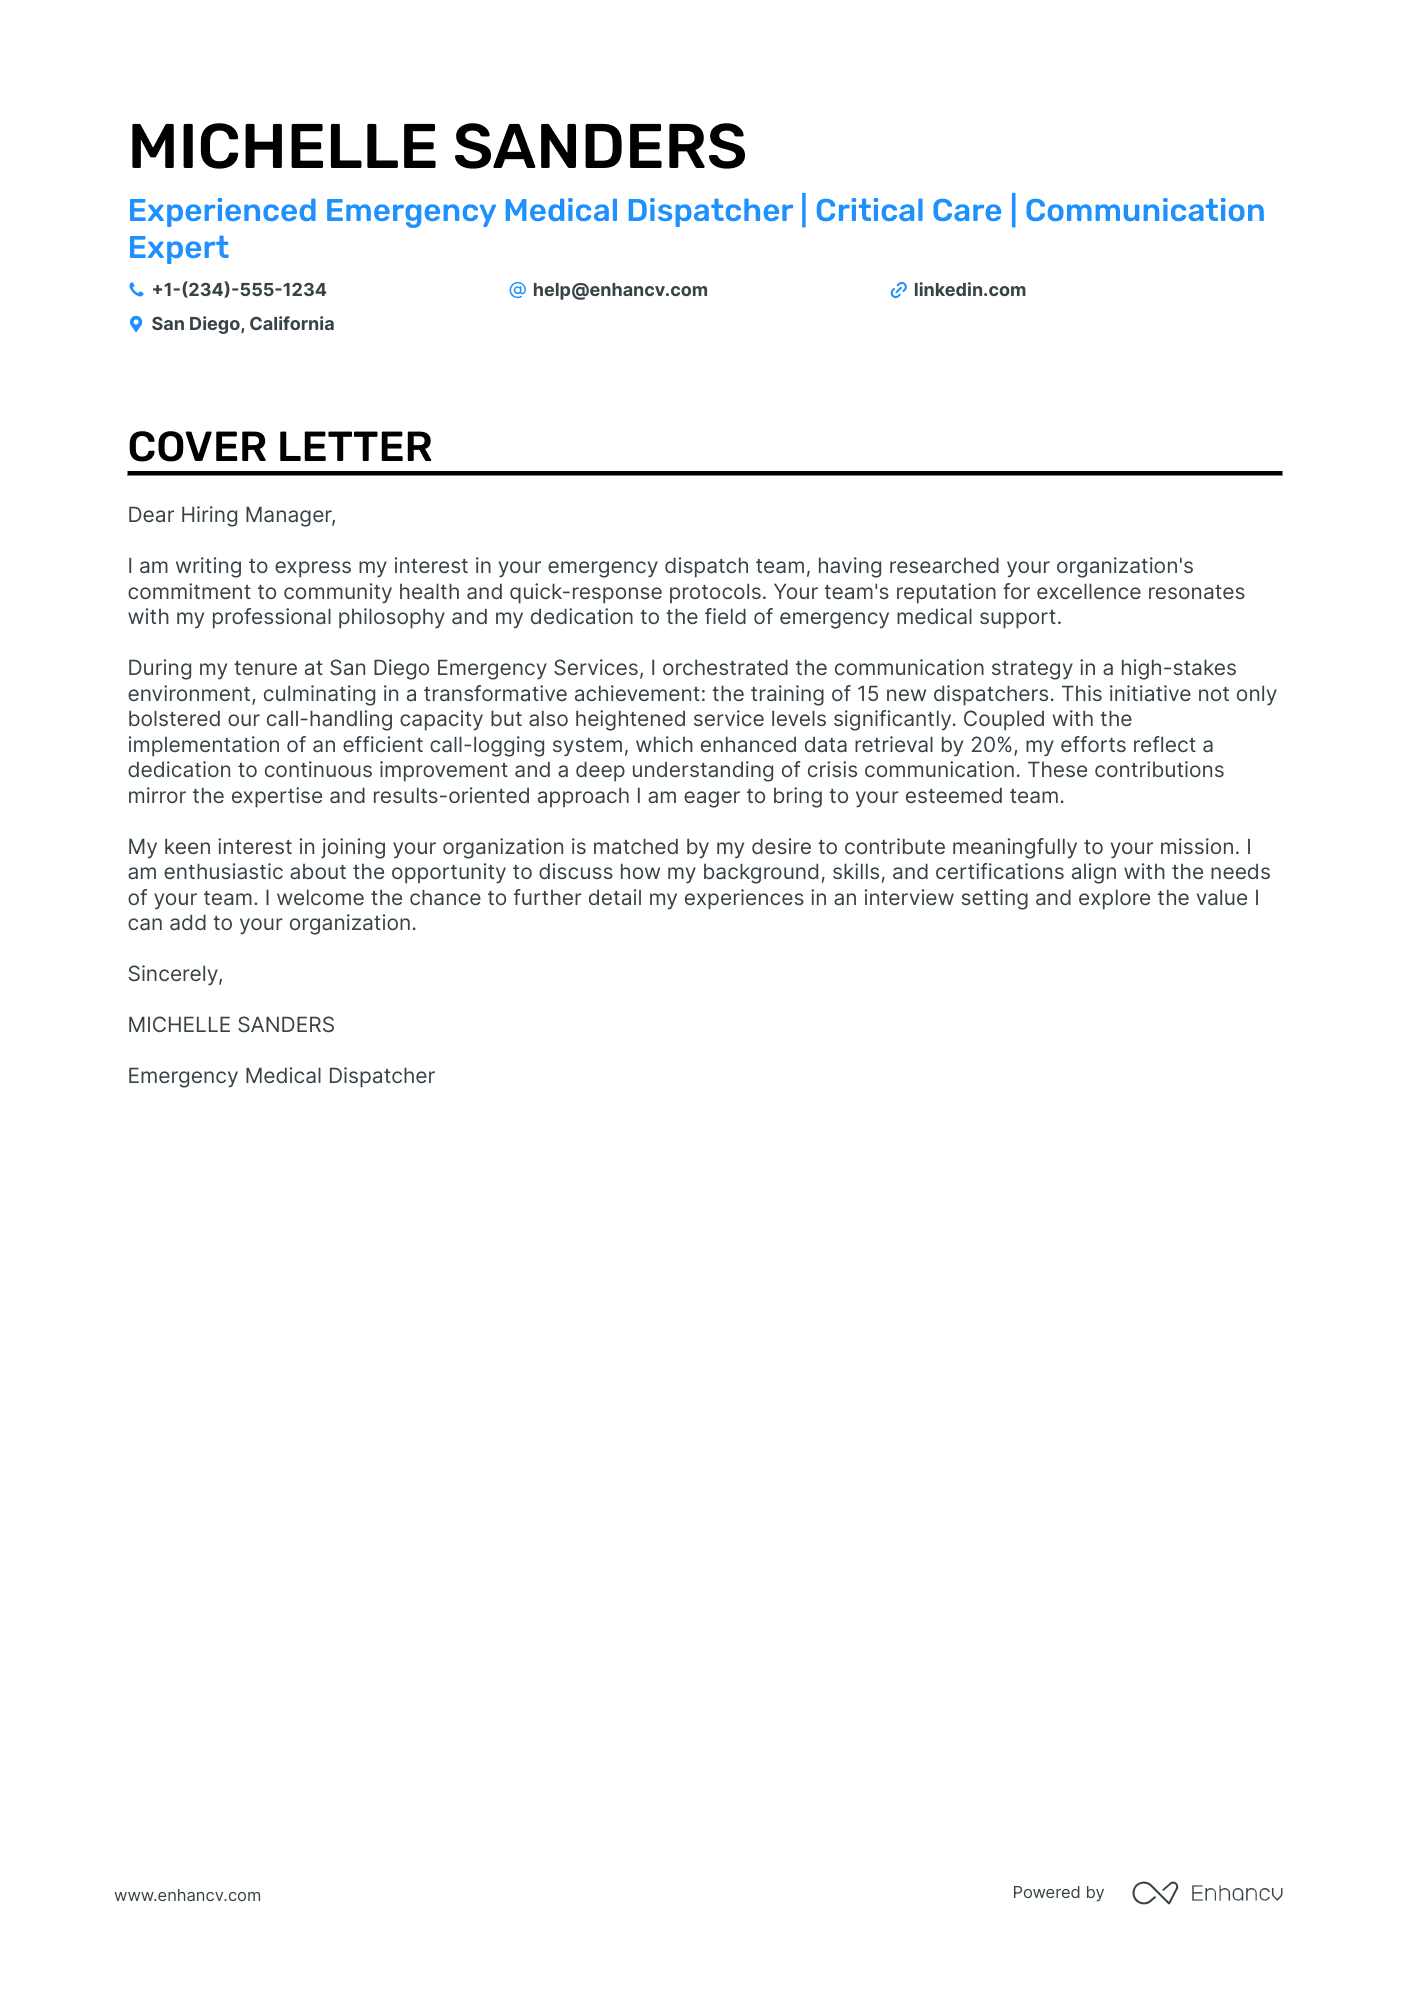 Emergency Dispatcher cover letter